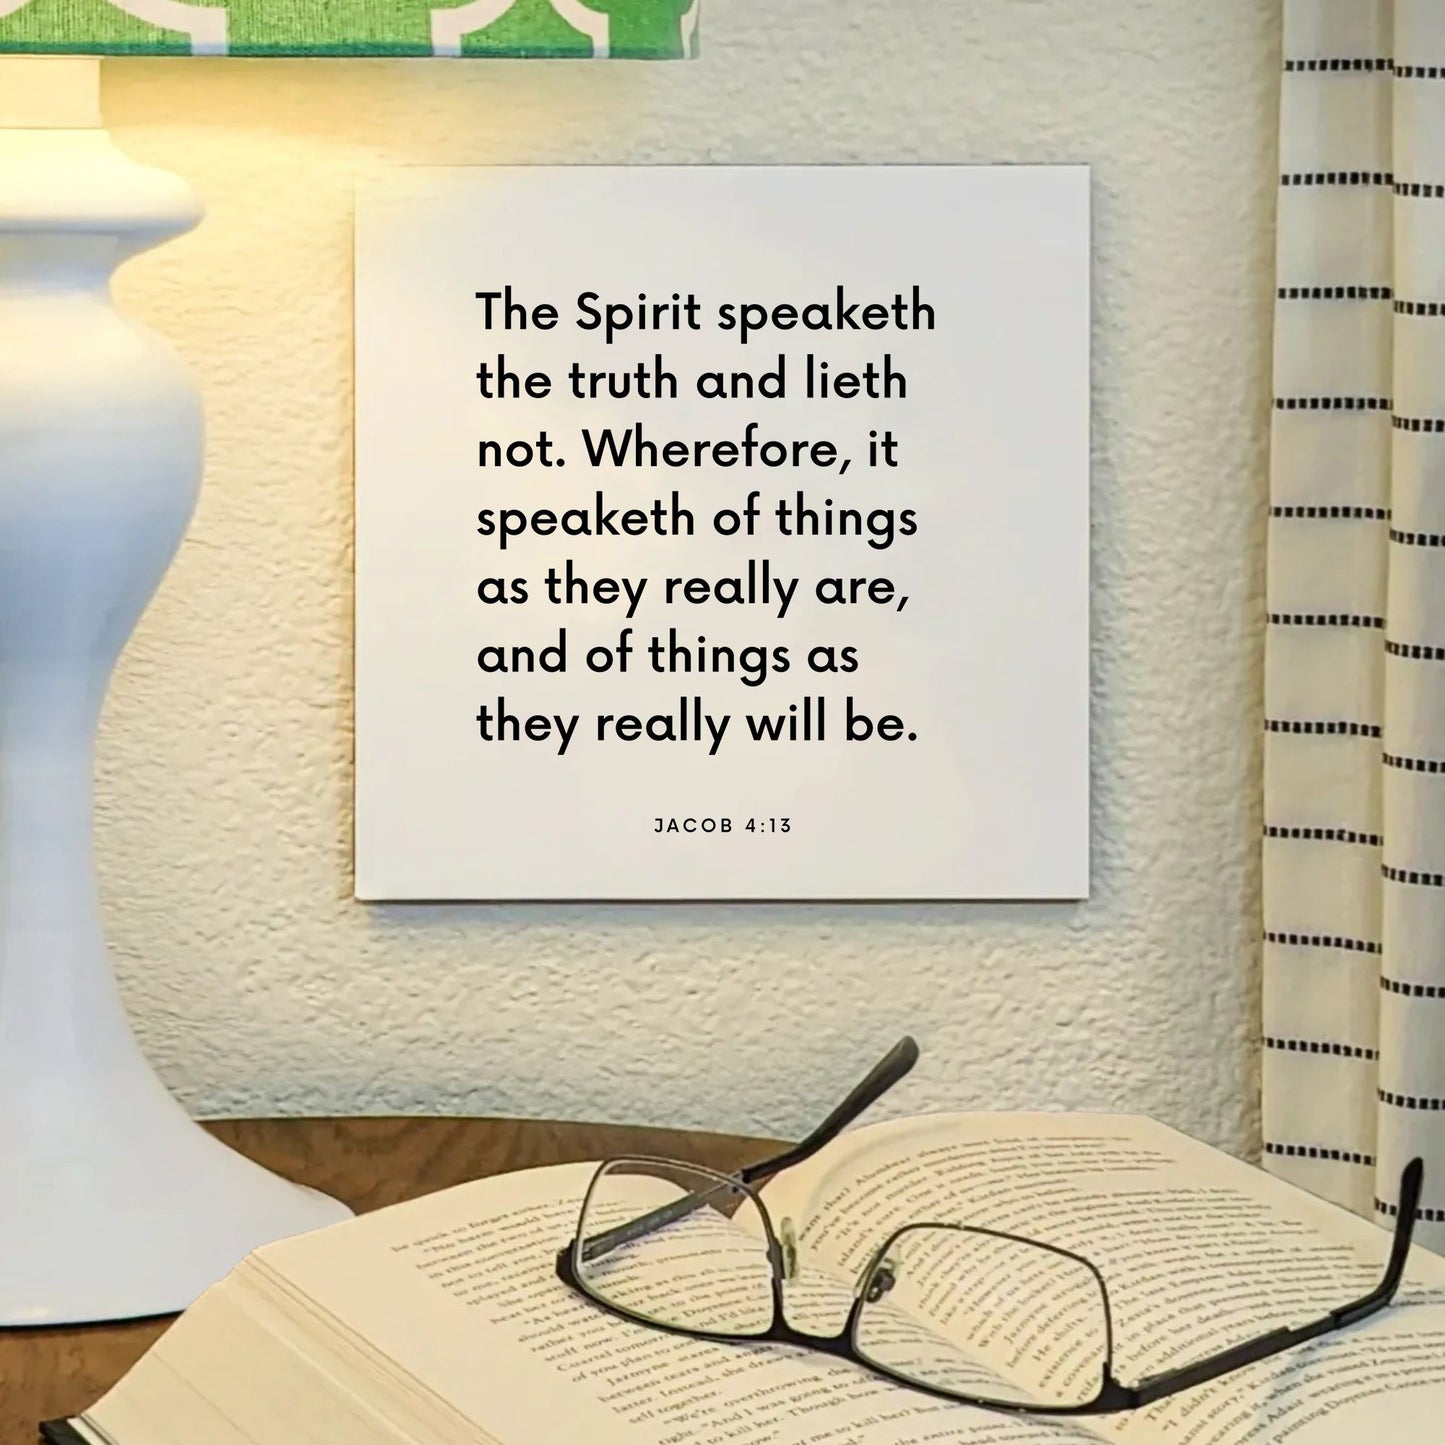 Lamp mouting of the scripture tile for Jacob 4:13 - "The Spirit speaketh the truth and lieth not"